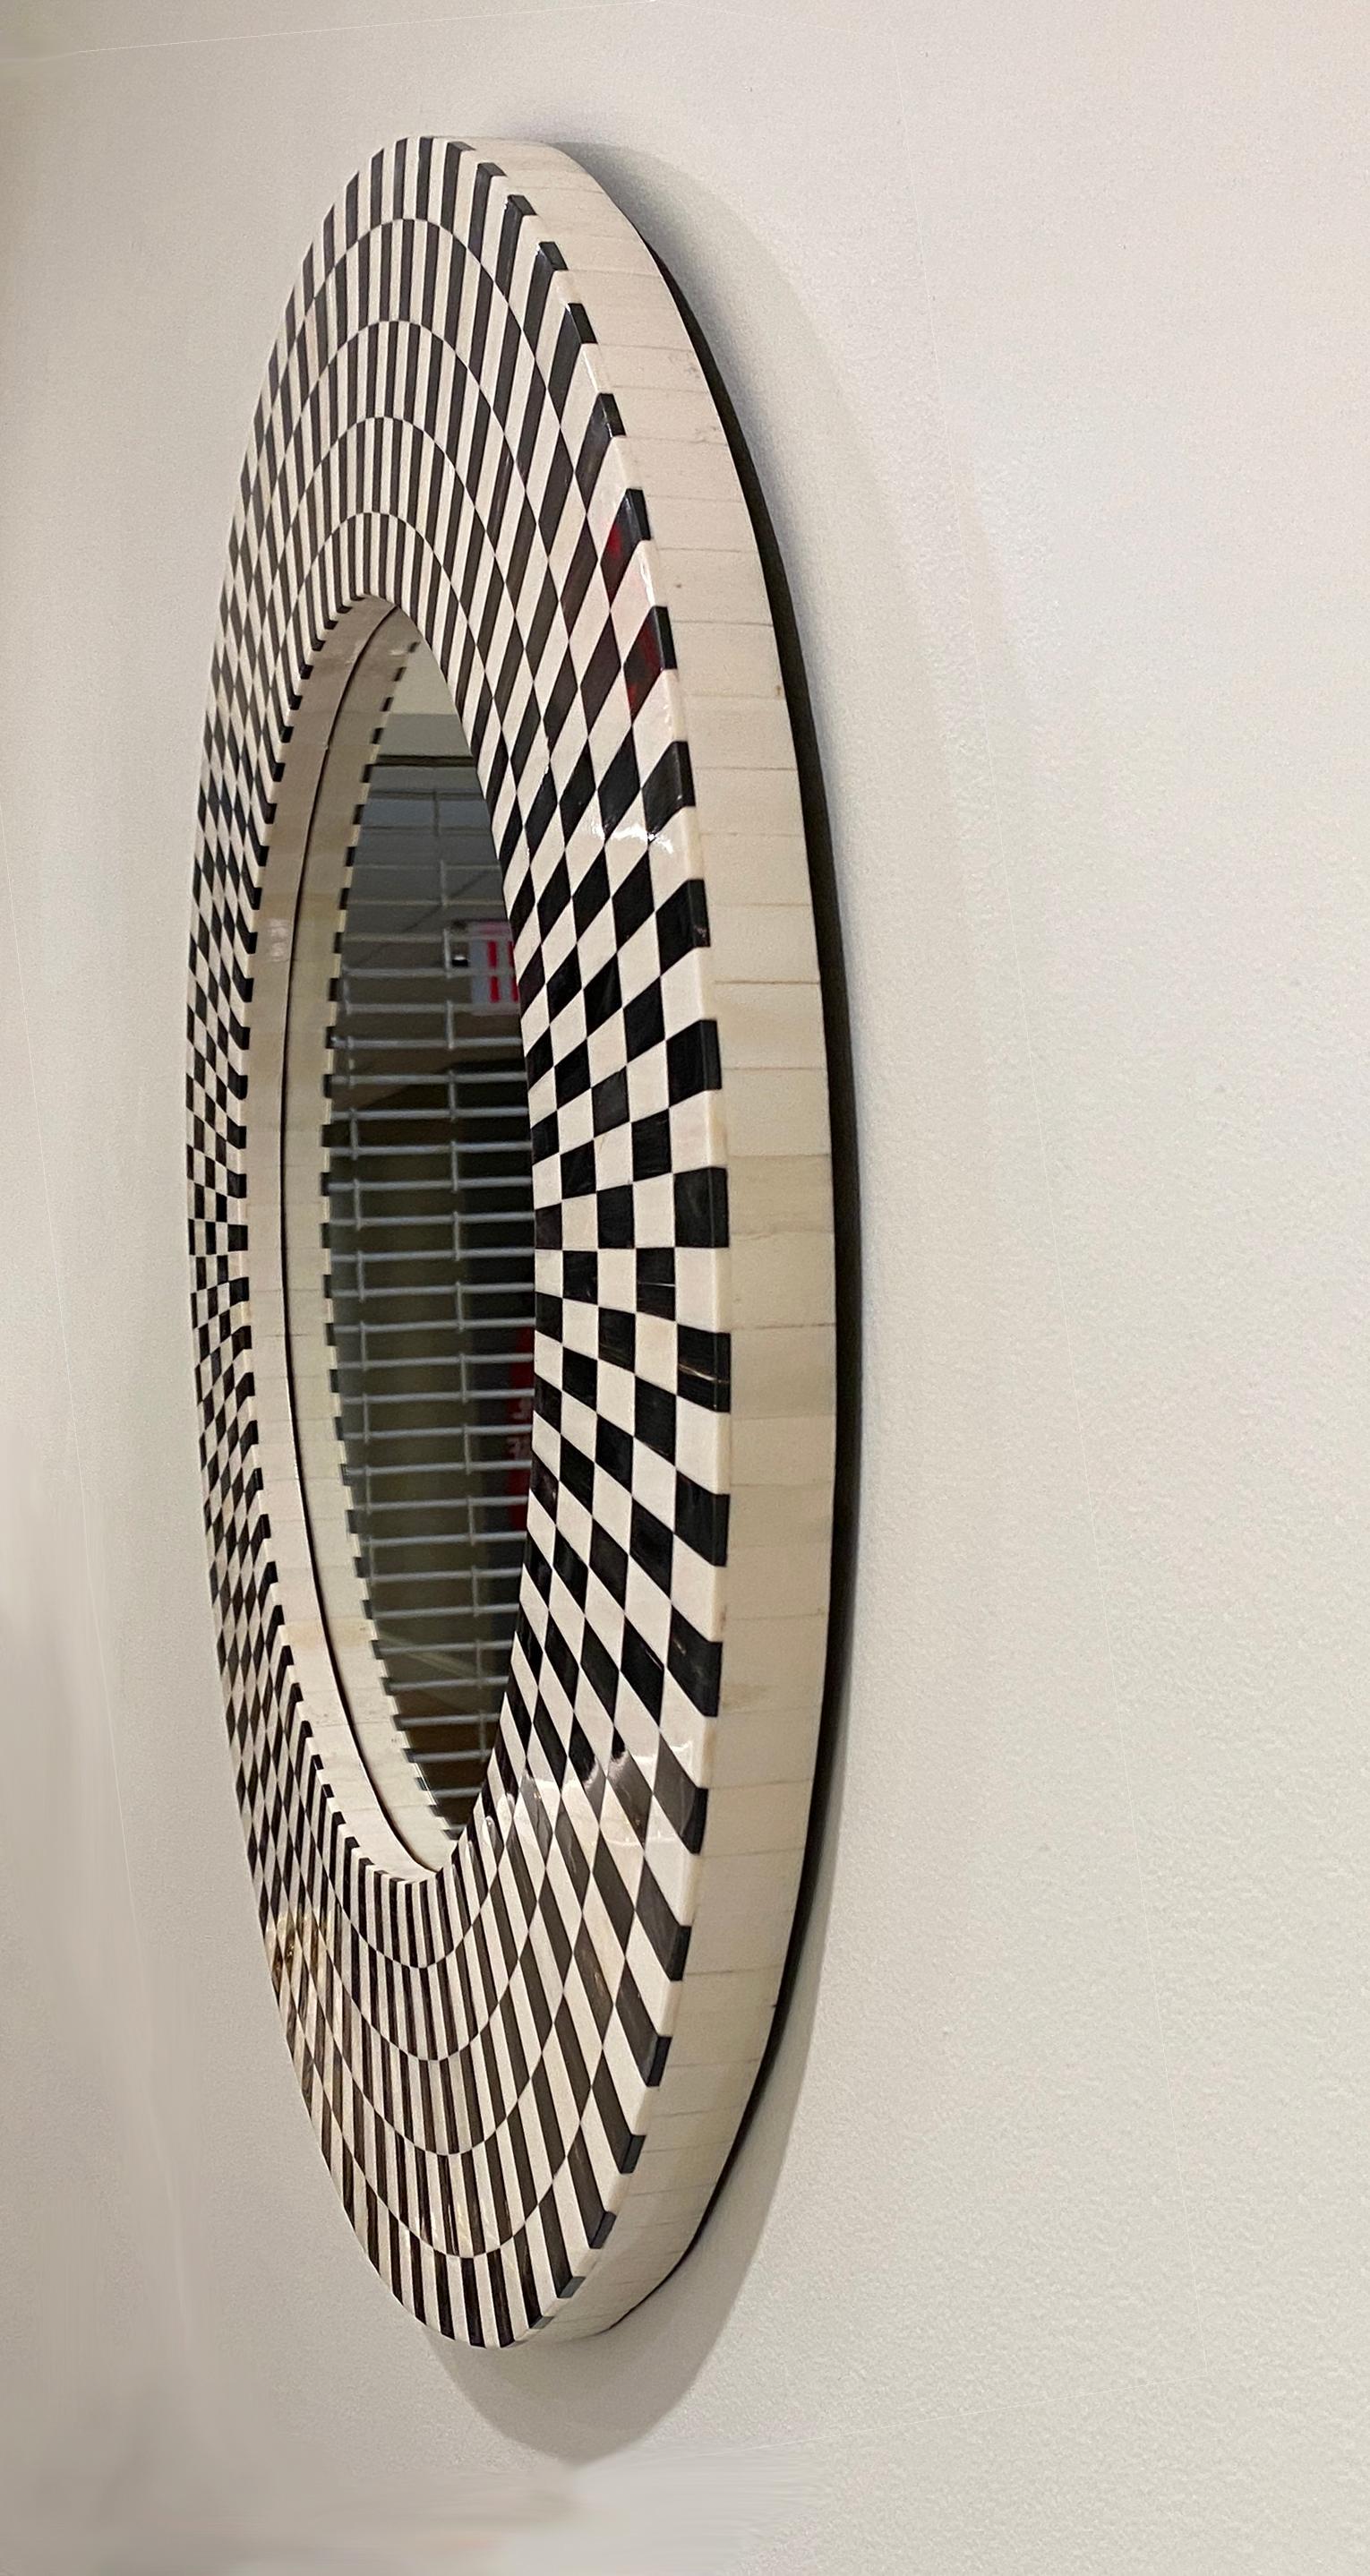 The Kaliedoscope Mirror is a part of the SAND Collection from Farrago Design.
Inspired by the numerous patterns in the Kaleidoscope, this mirror is handcrafted with bone and horn chips. Each bone and horn chip is hand carved and onlaid alternately